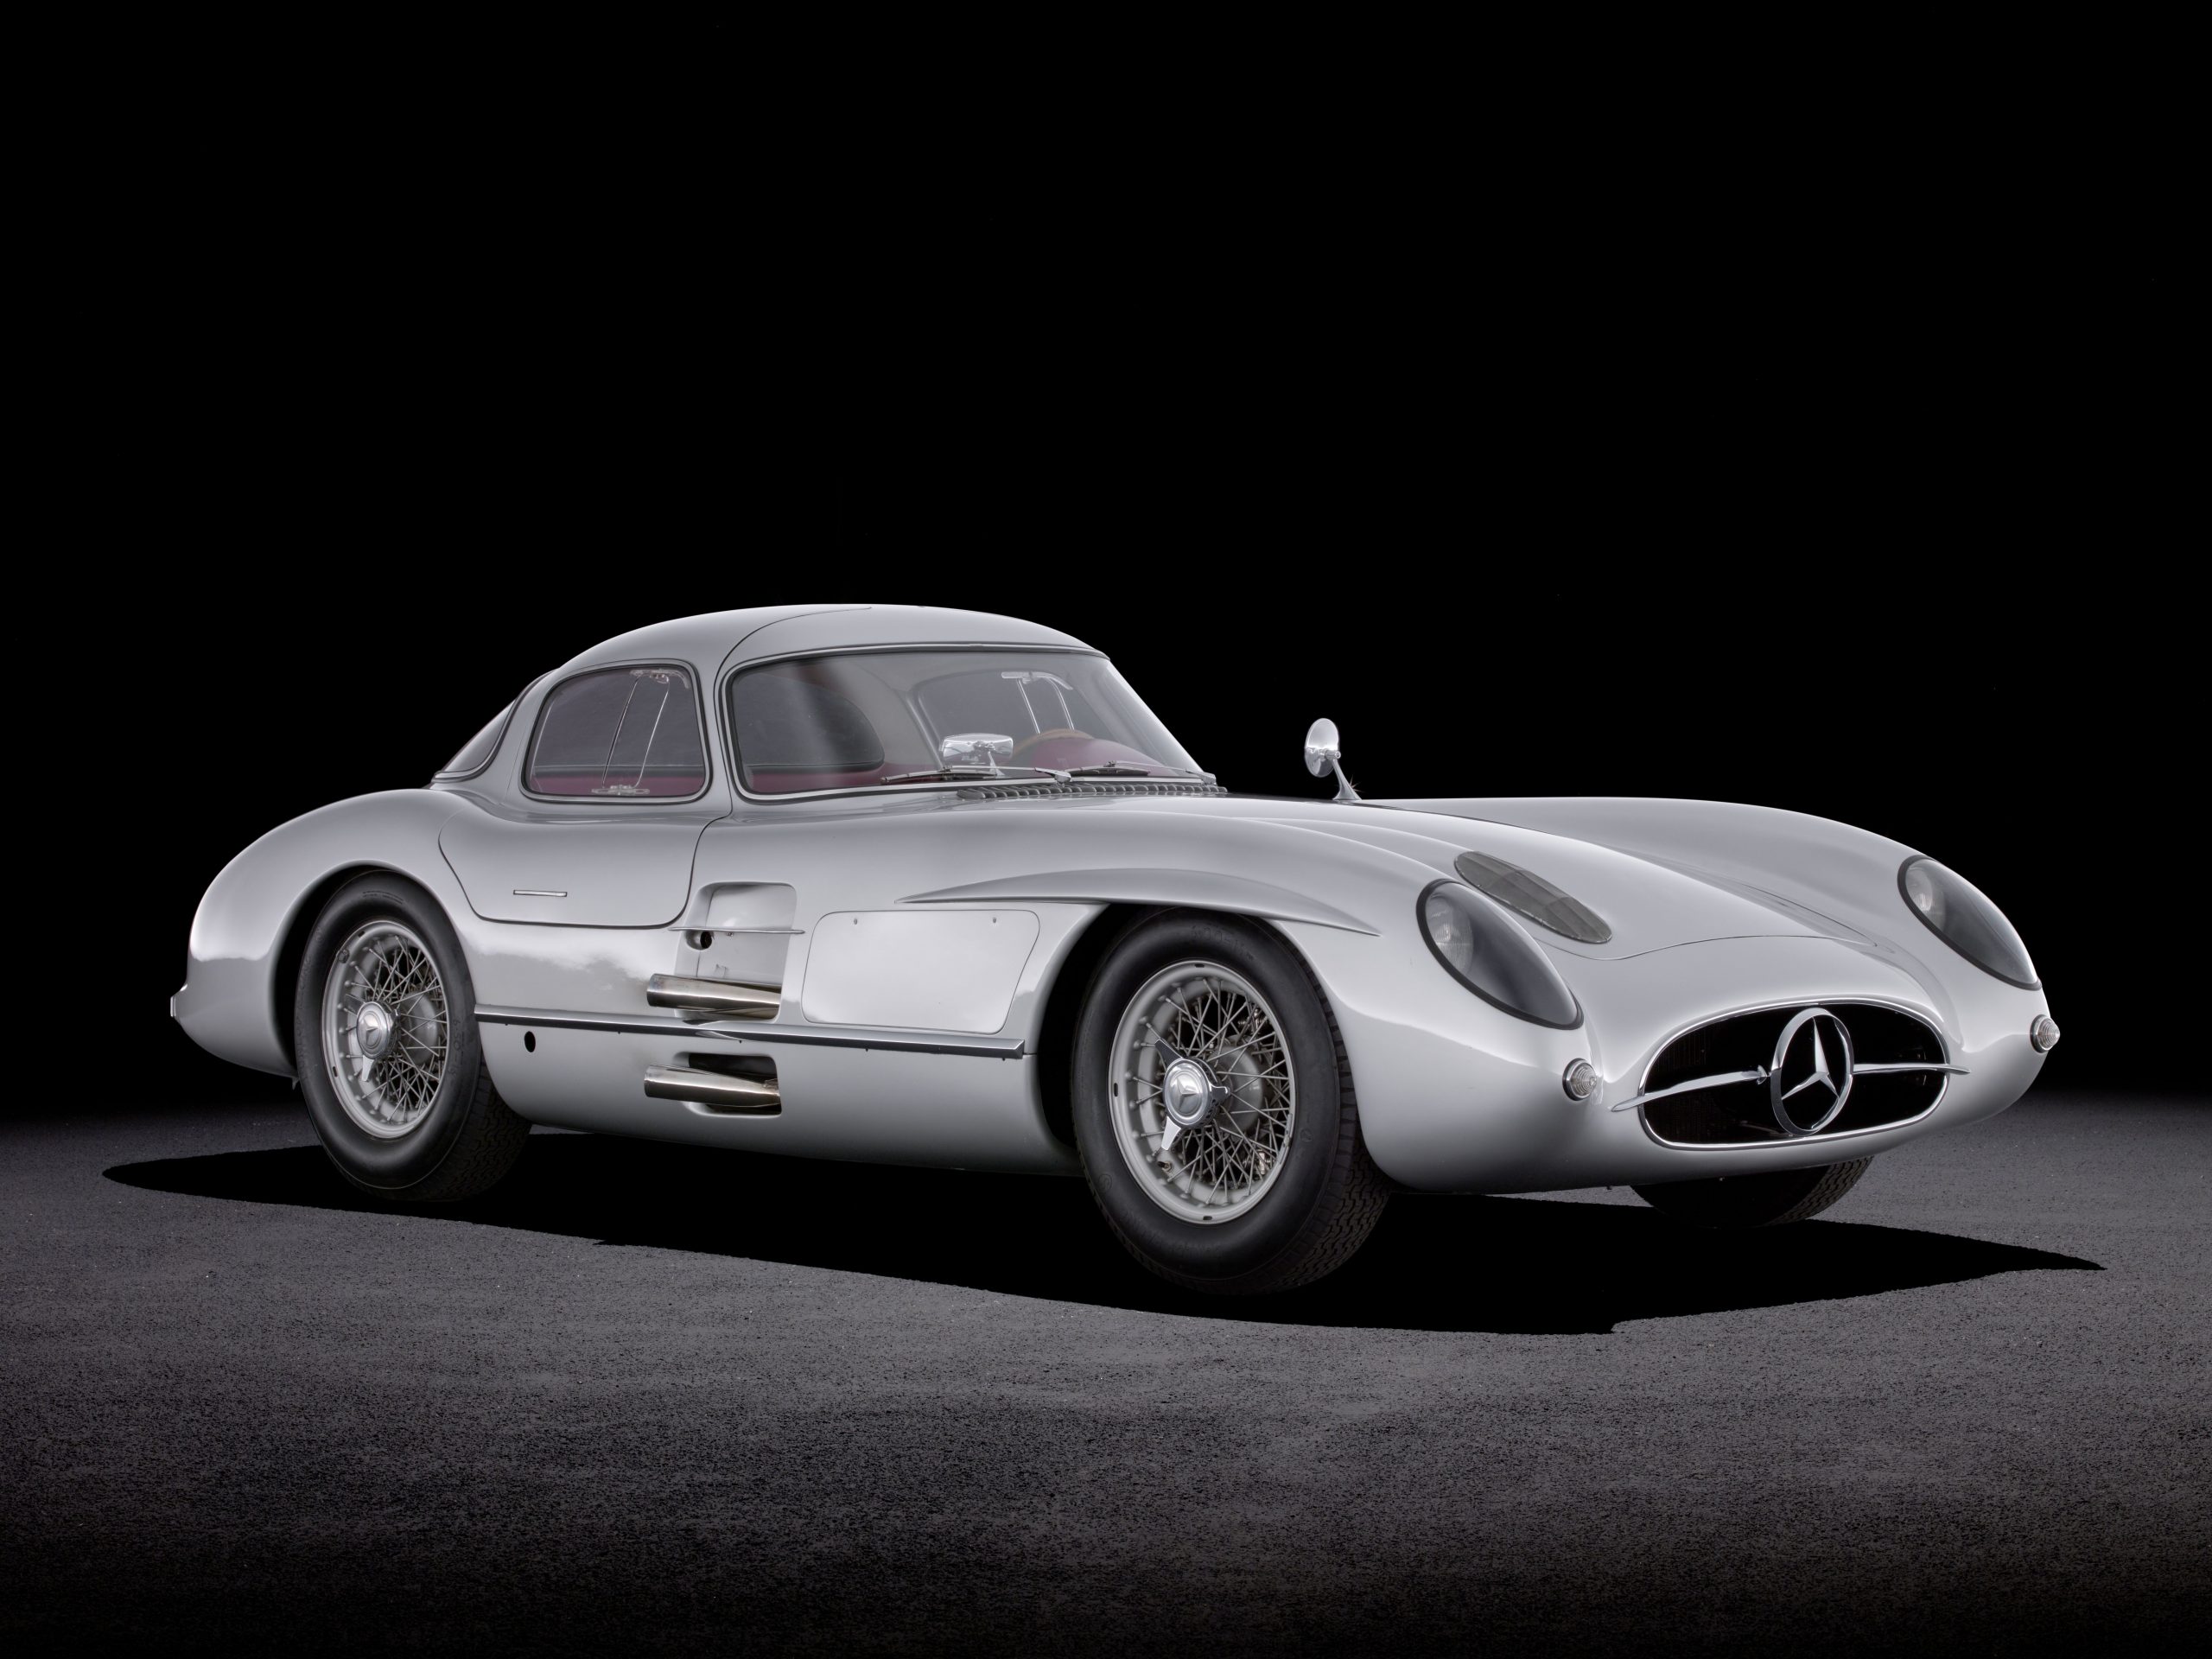 The €135M Mercedes-Benz 300 SLR Uhlenhaut Coupé is the most valuable car on the planet. 